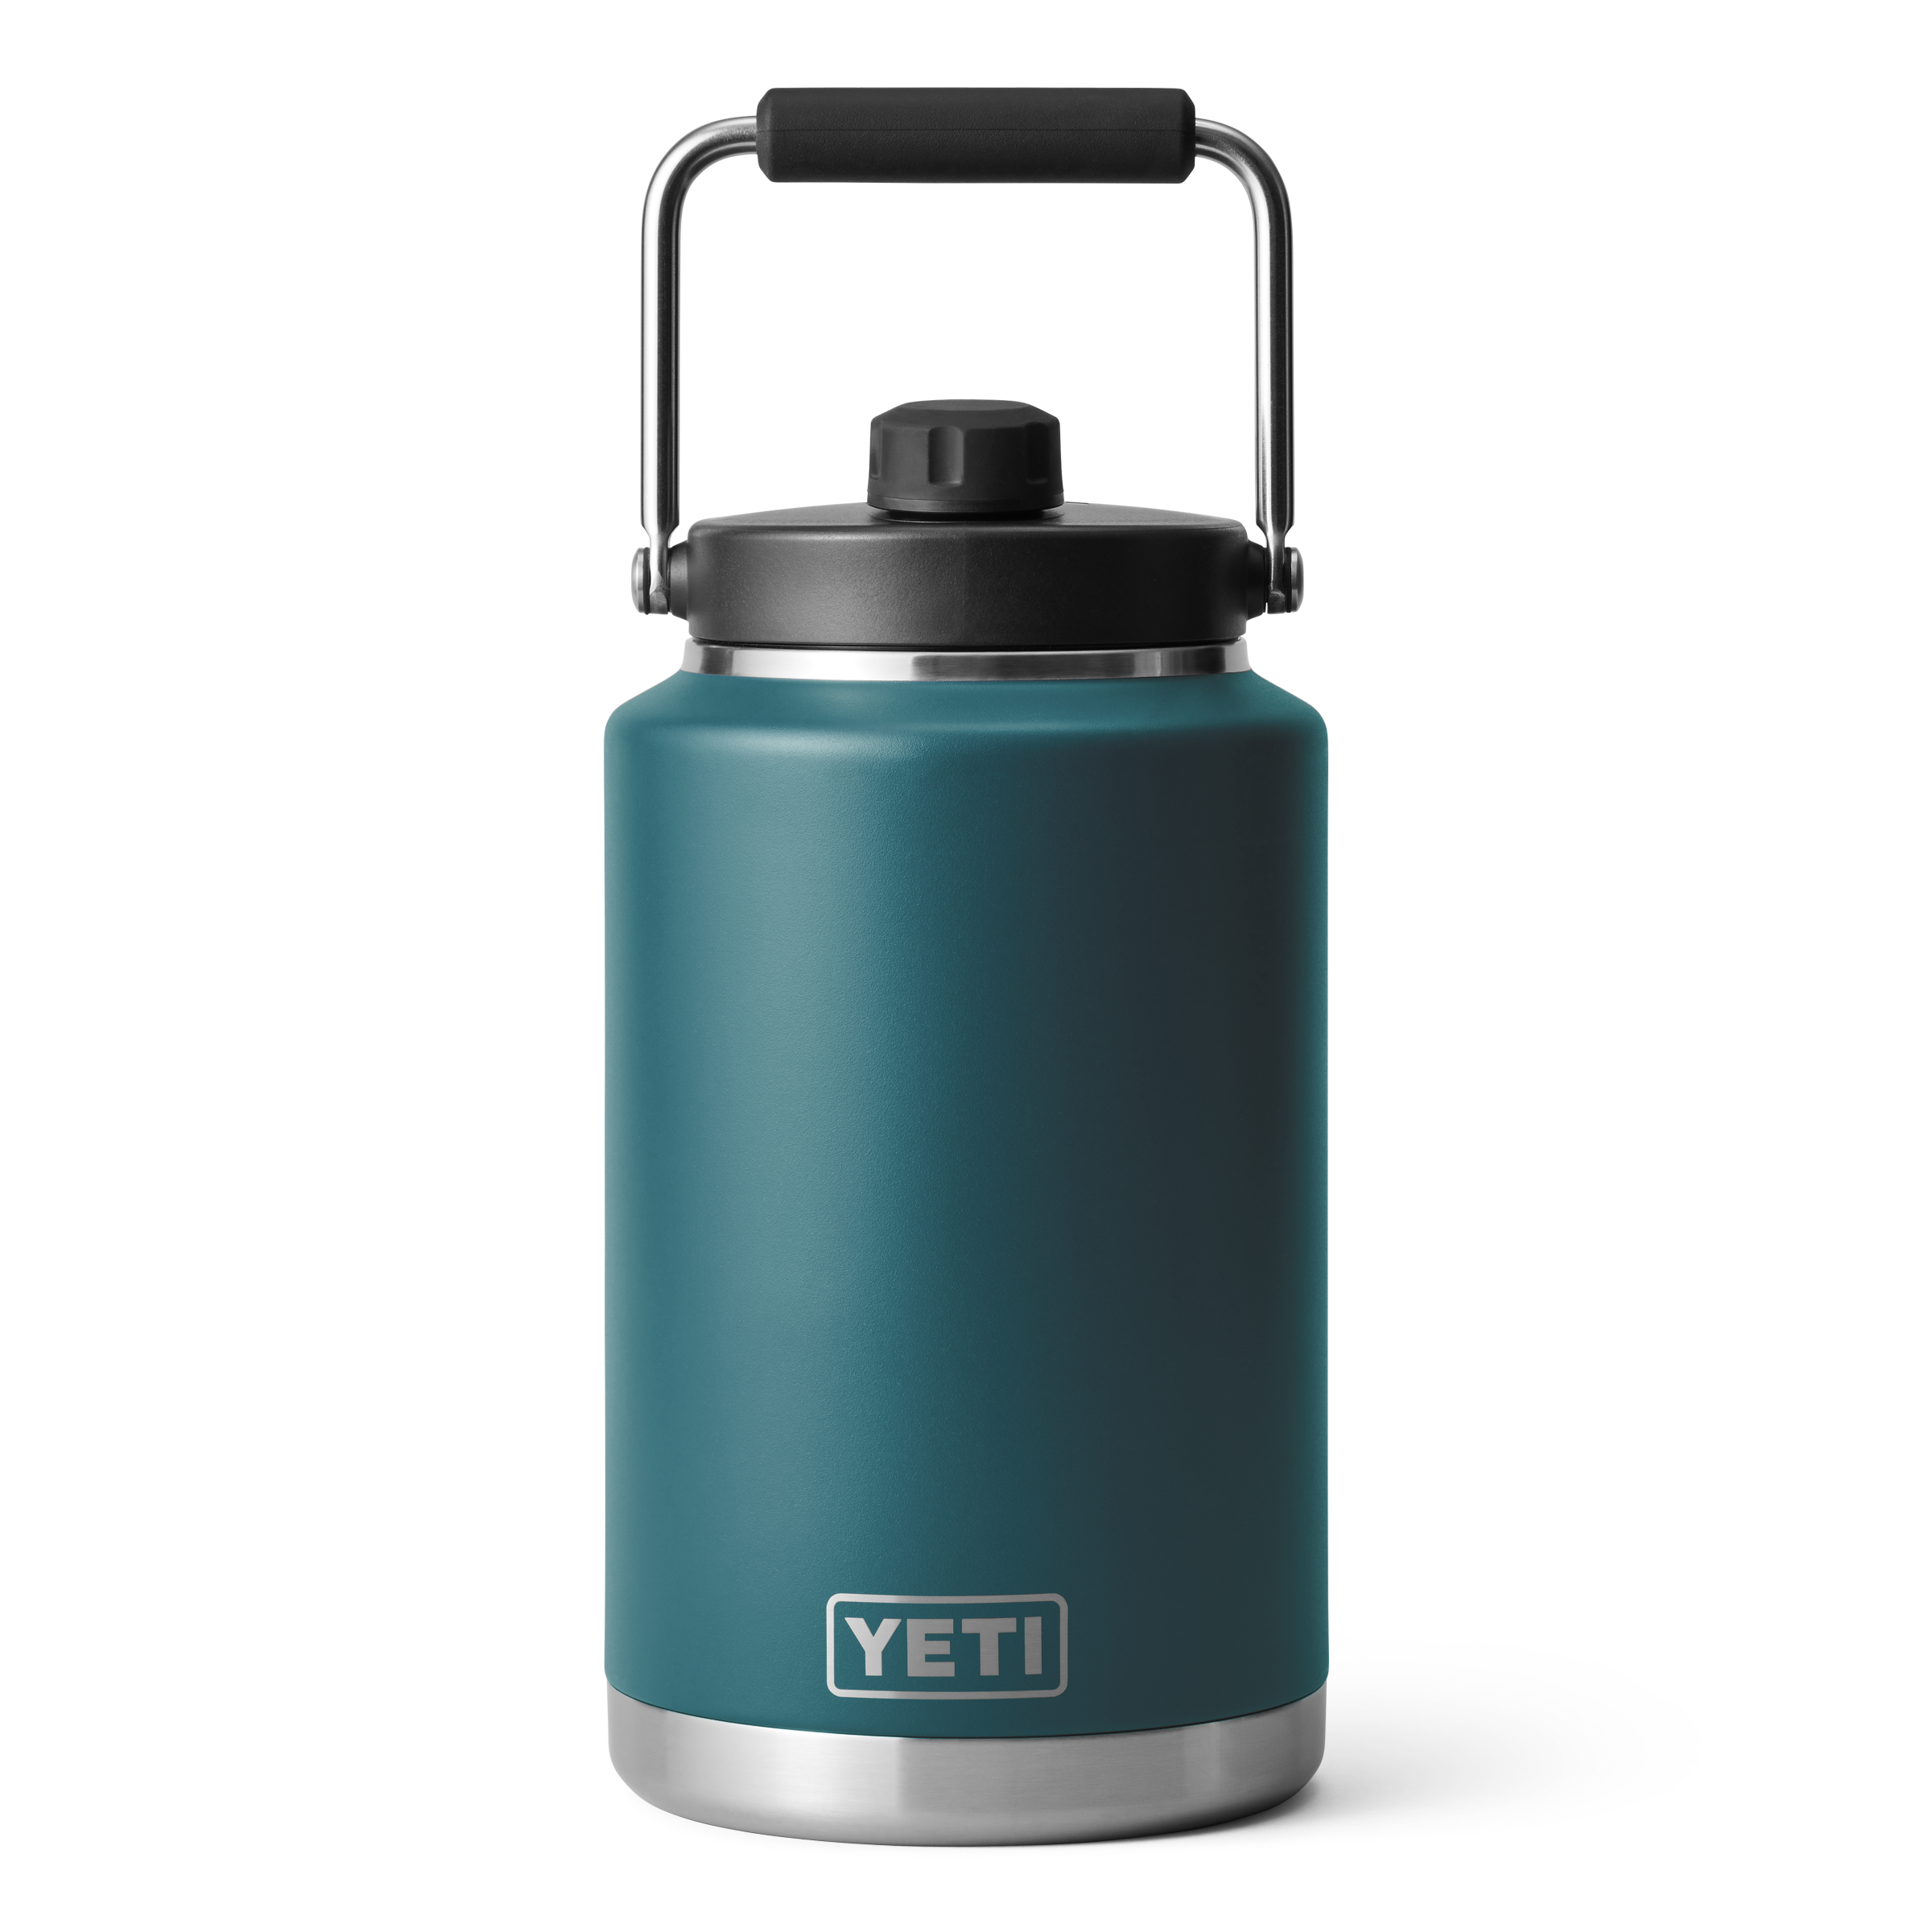 Yeti One Gallon Jug - ONE GALLON / AGAVE TEAL - Mansfield Hunting & Fishing - Products to prepare for Corona Virus